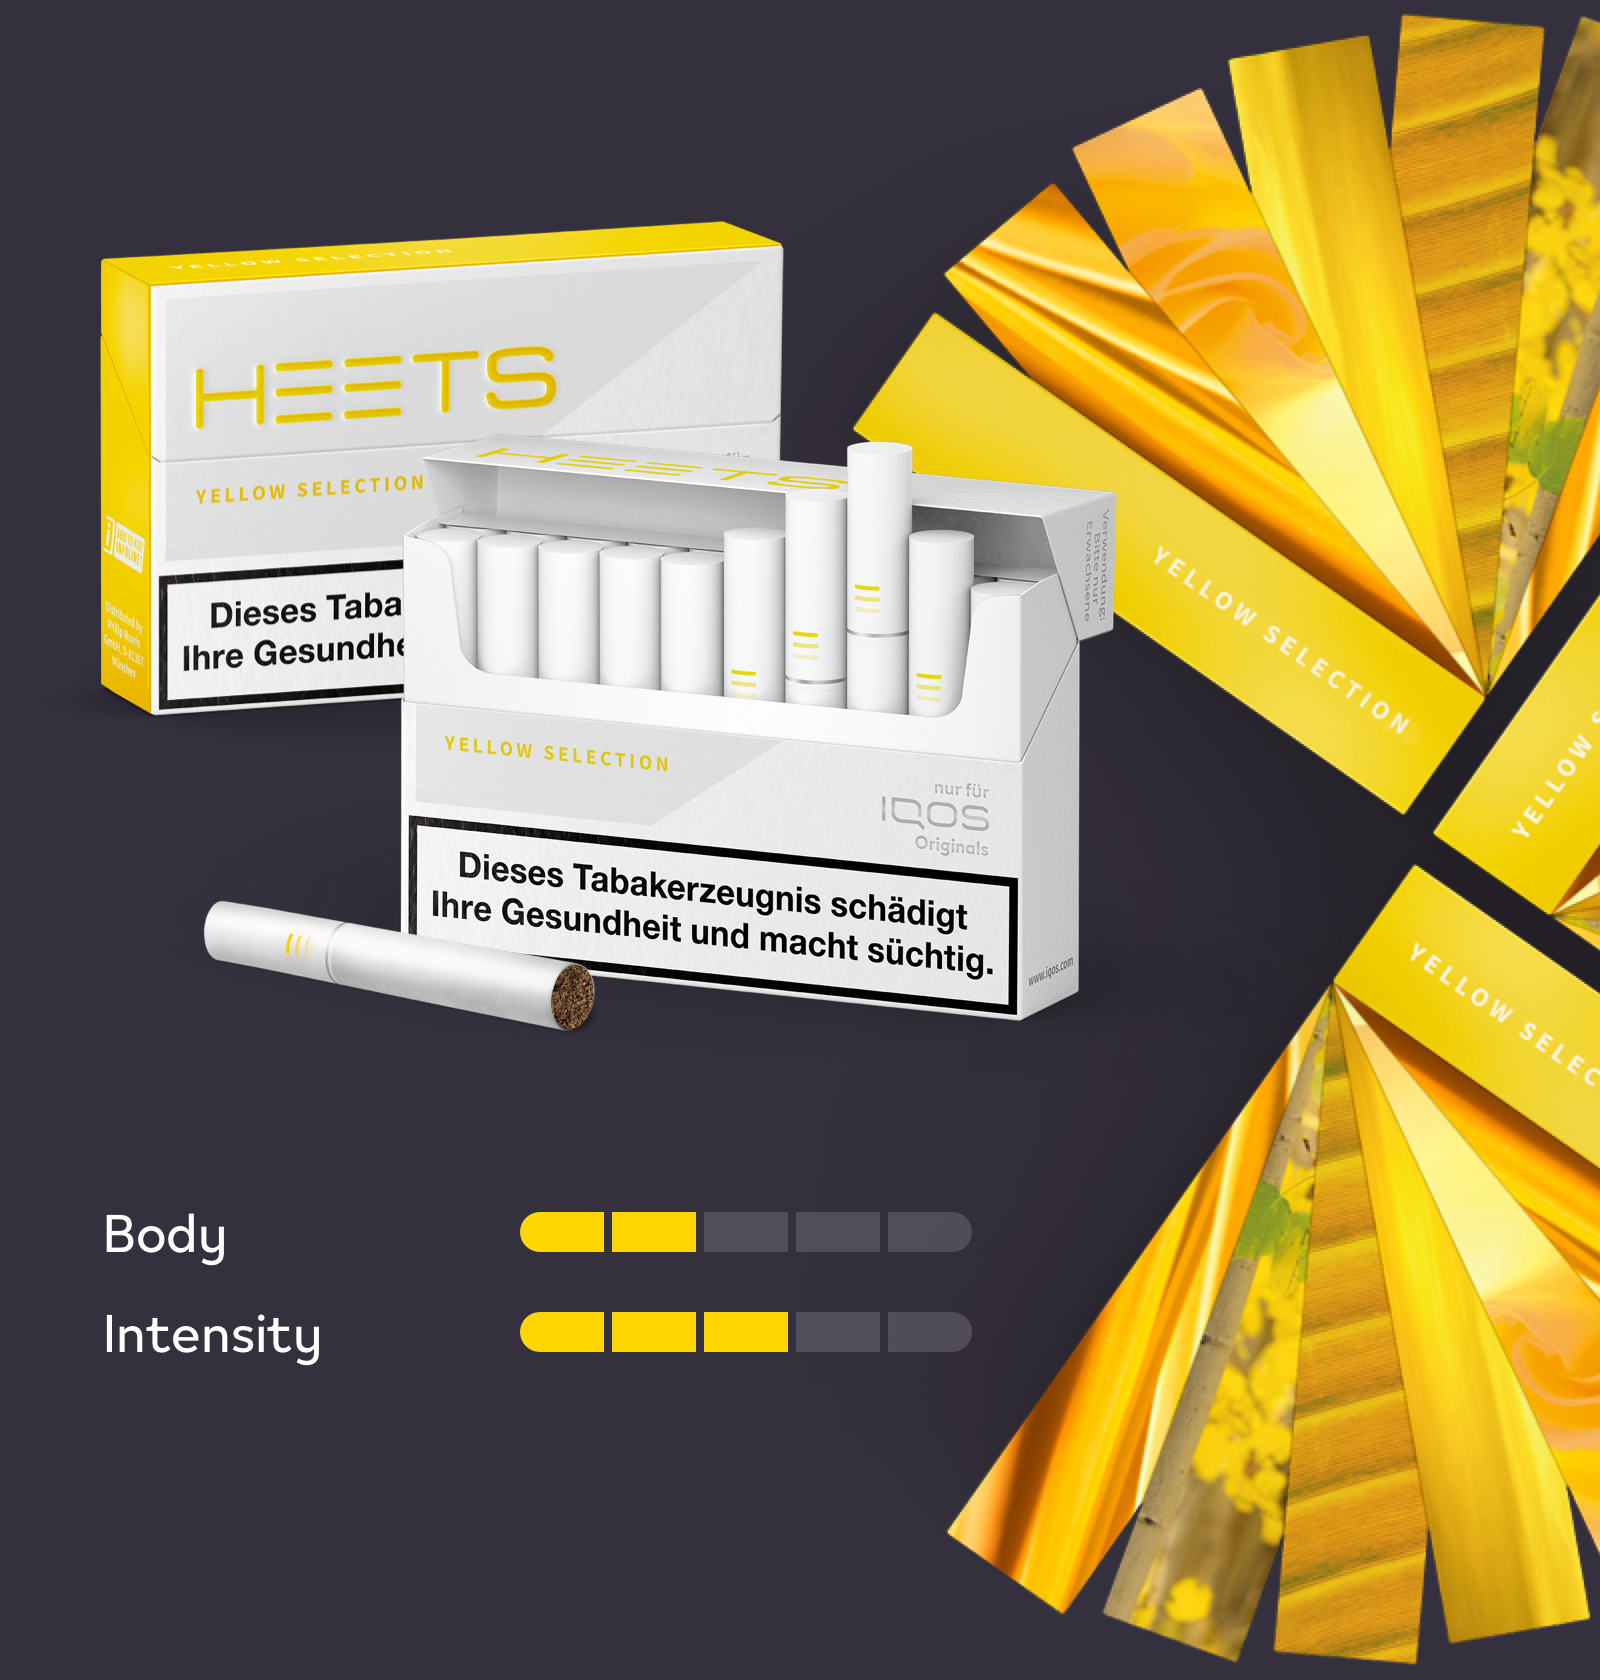 HEETS Yellow – Flavour Details